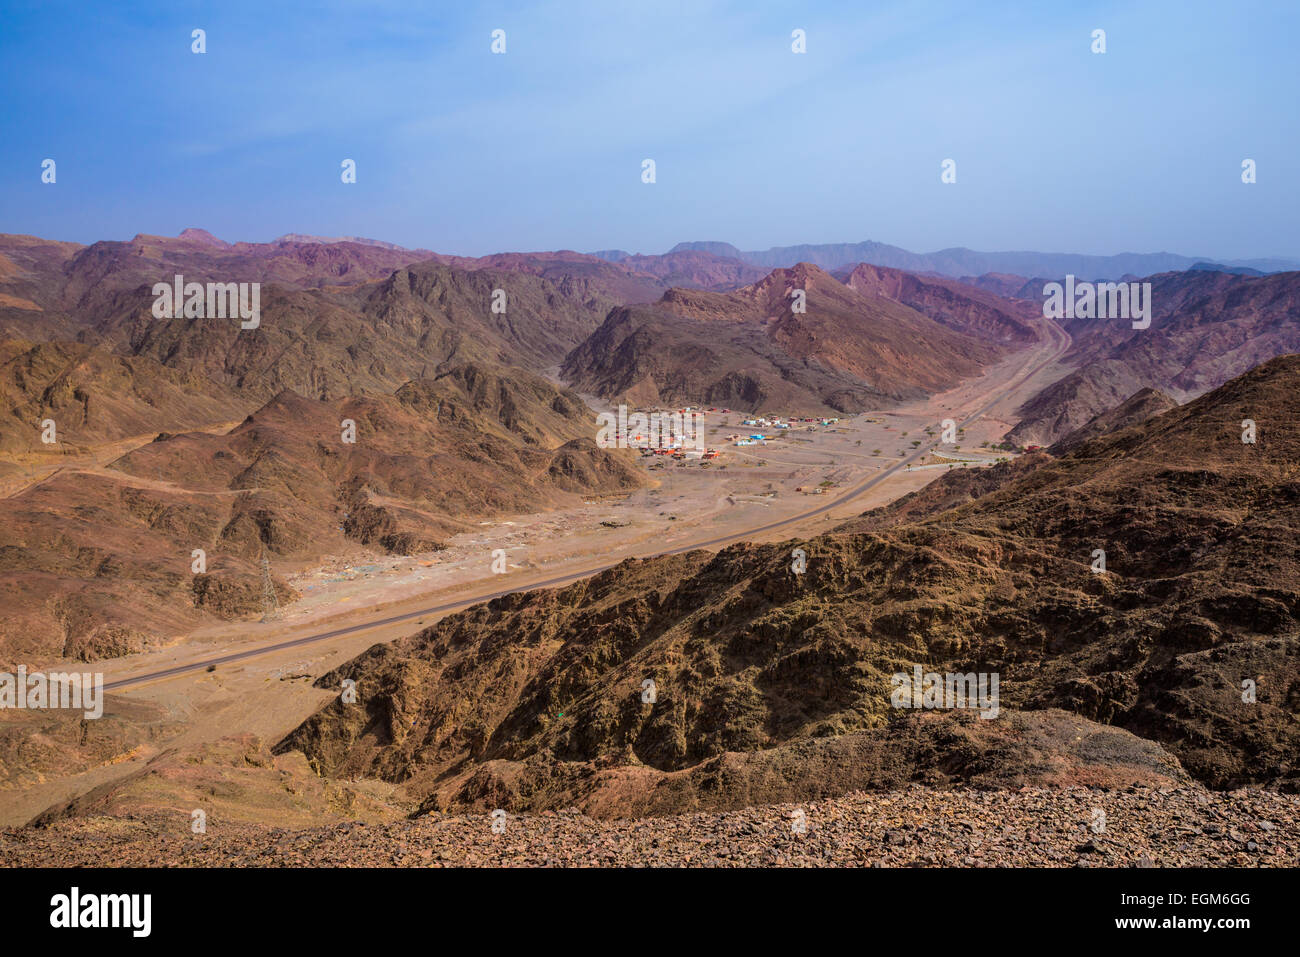 View over road leading to Israel near Taba Heights Holiday resort located on the Red Sea in Sinai Peninsula, Egypt Stock Photo